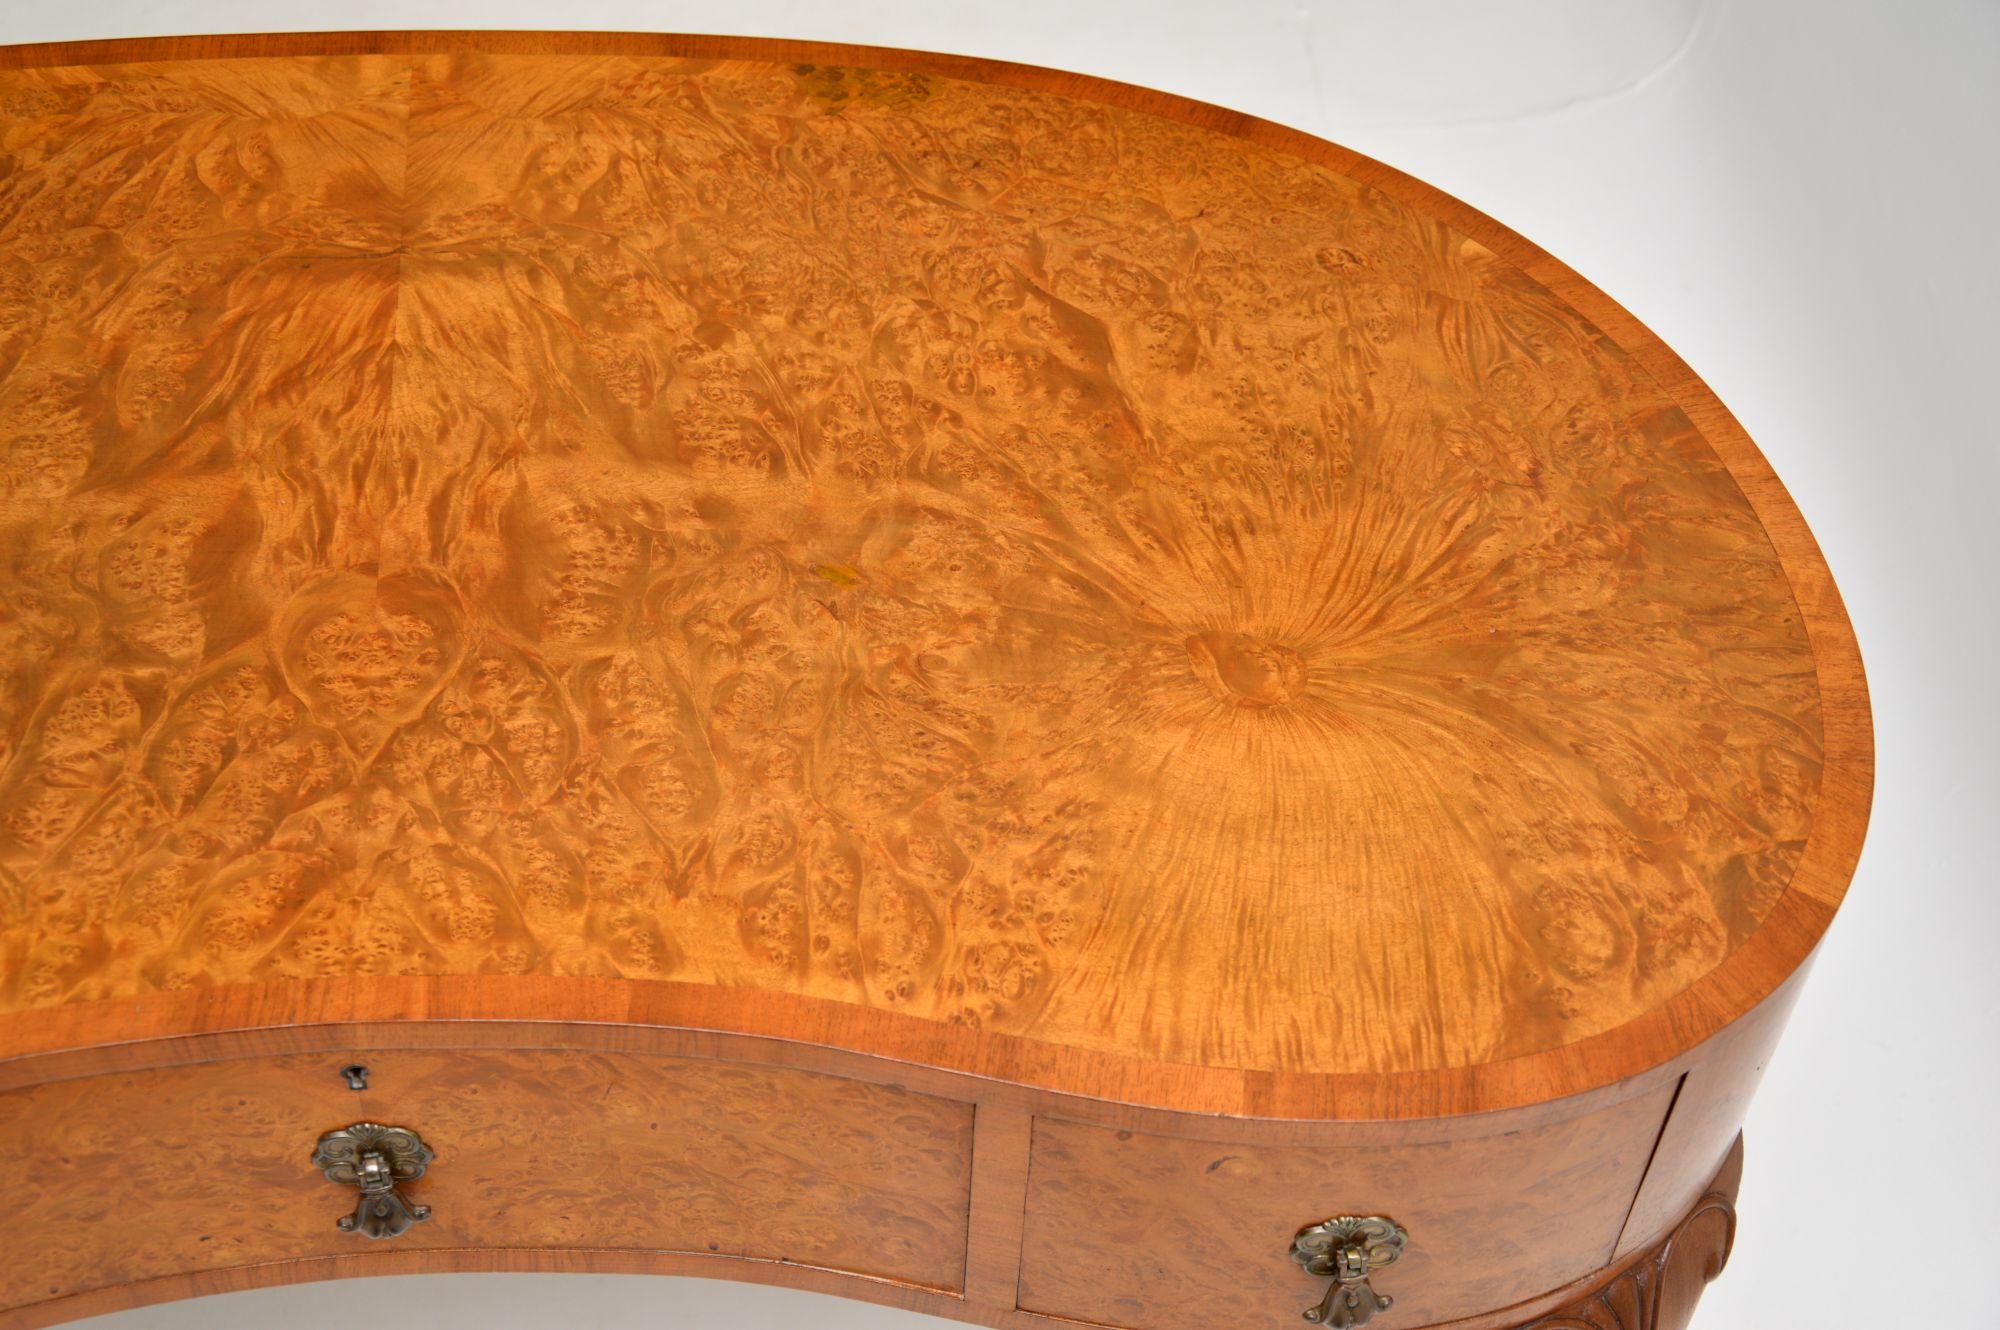 Early 20th Century Antique Burr Walnut Kidney Shaped Desk or Dressing Table by Waring & Gillows